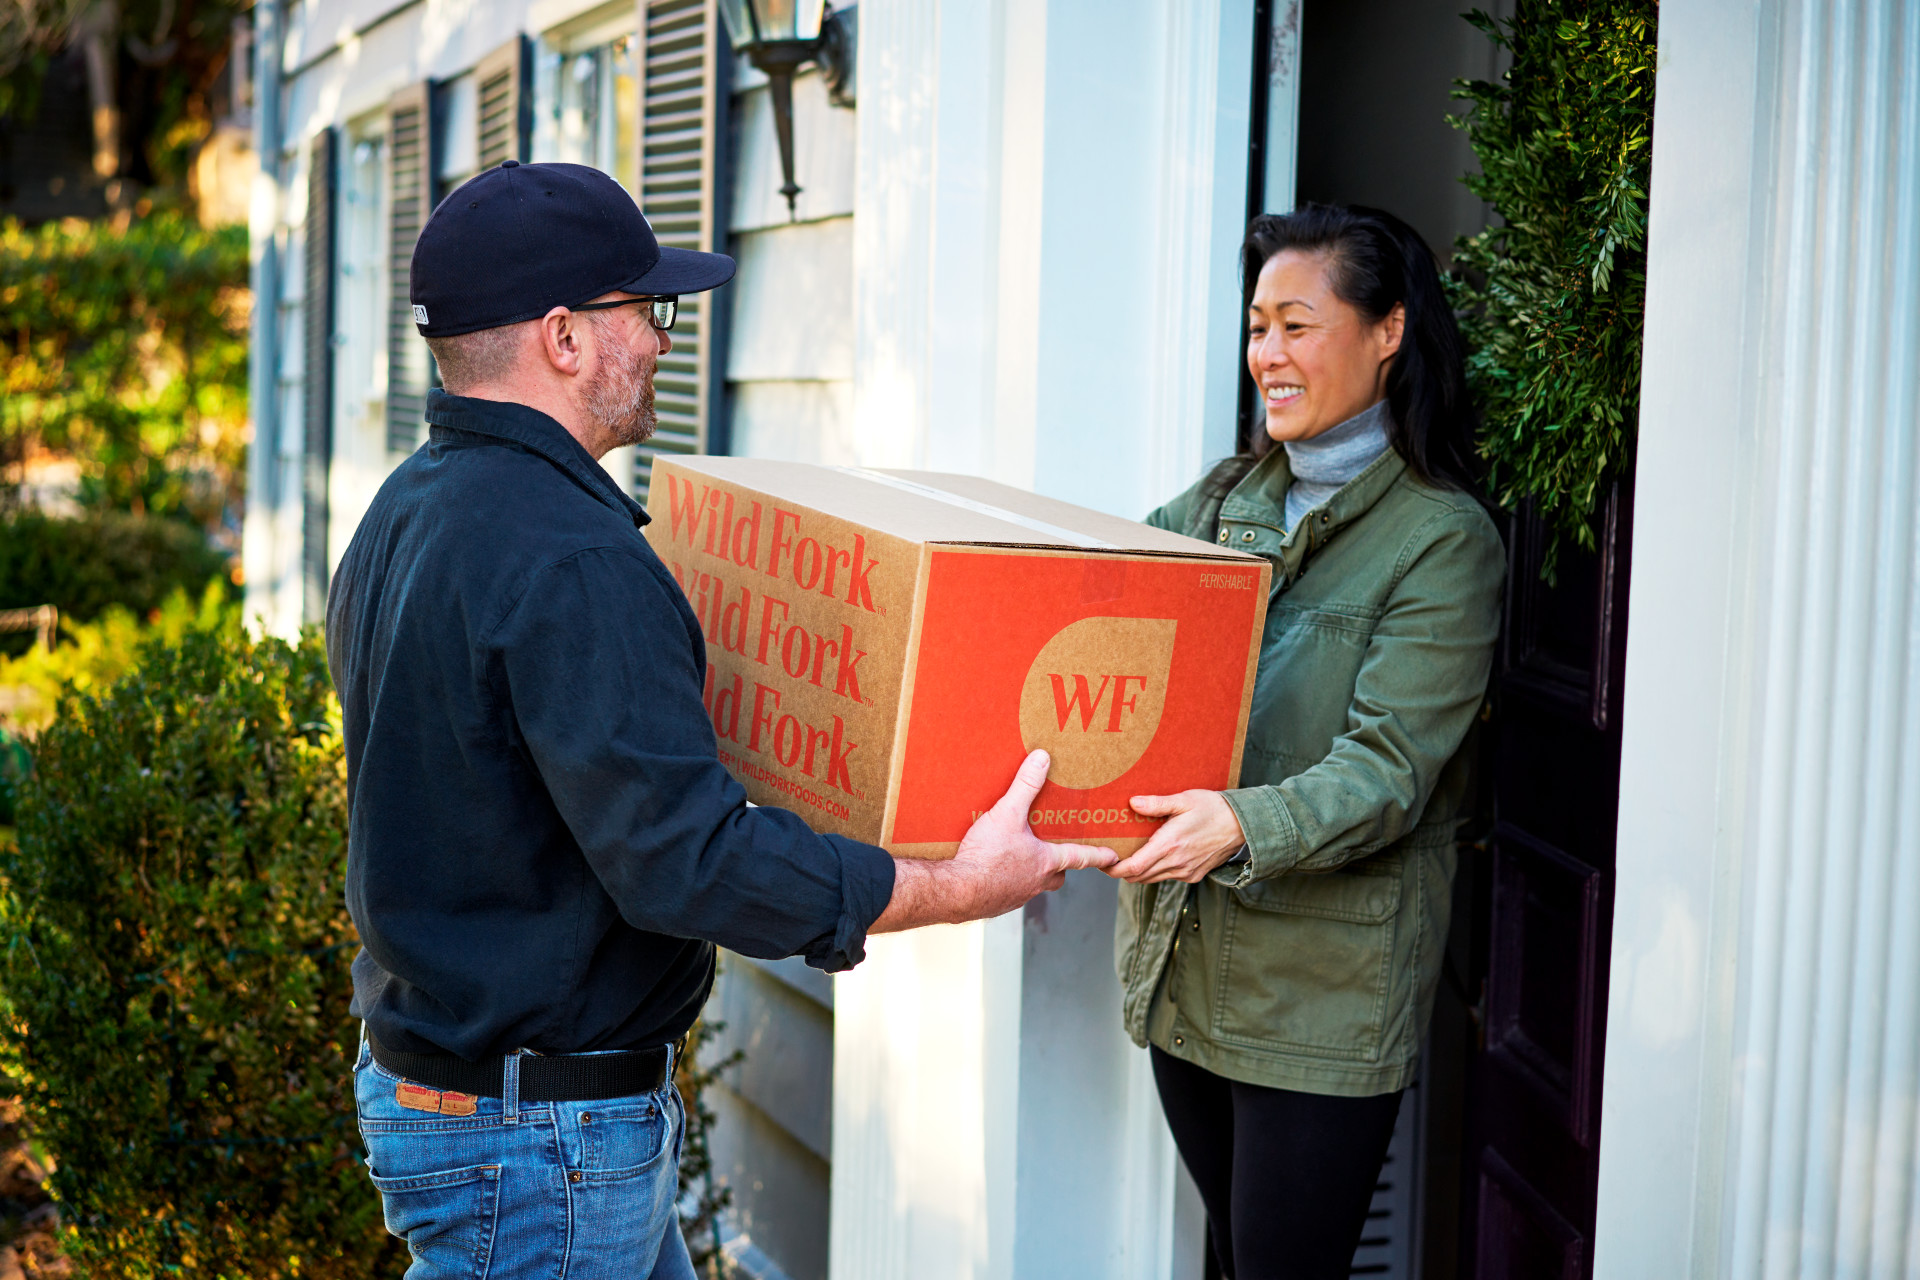 Box Delivery Handoff on Doorstep 1920 px / 1280 px png